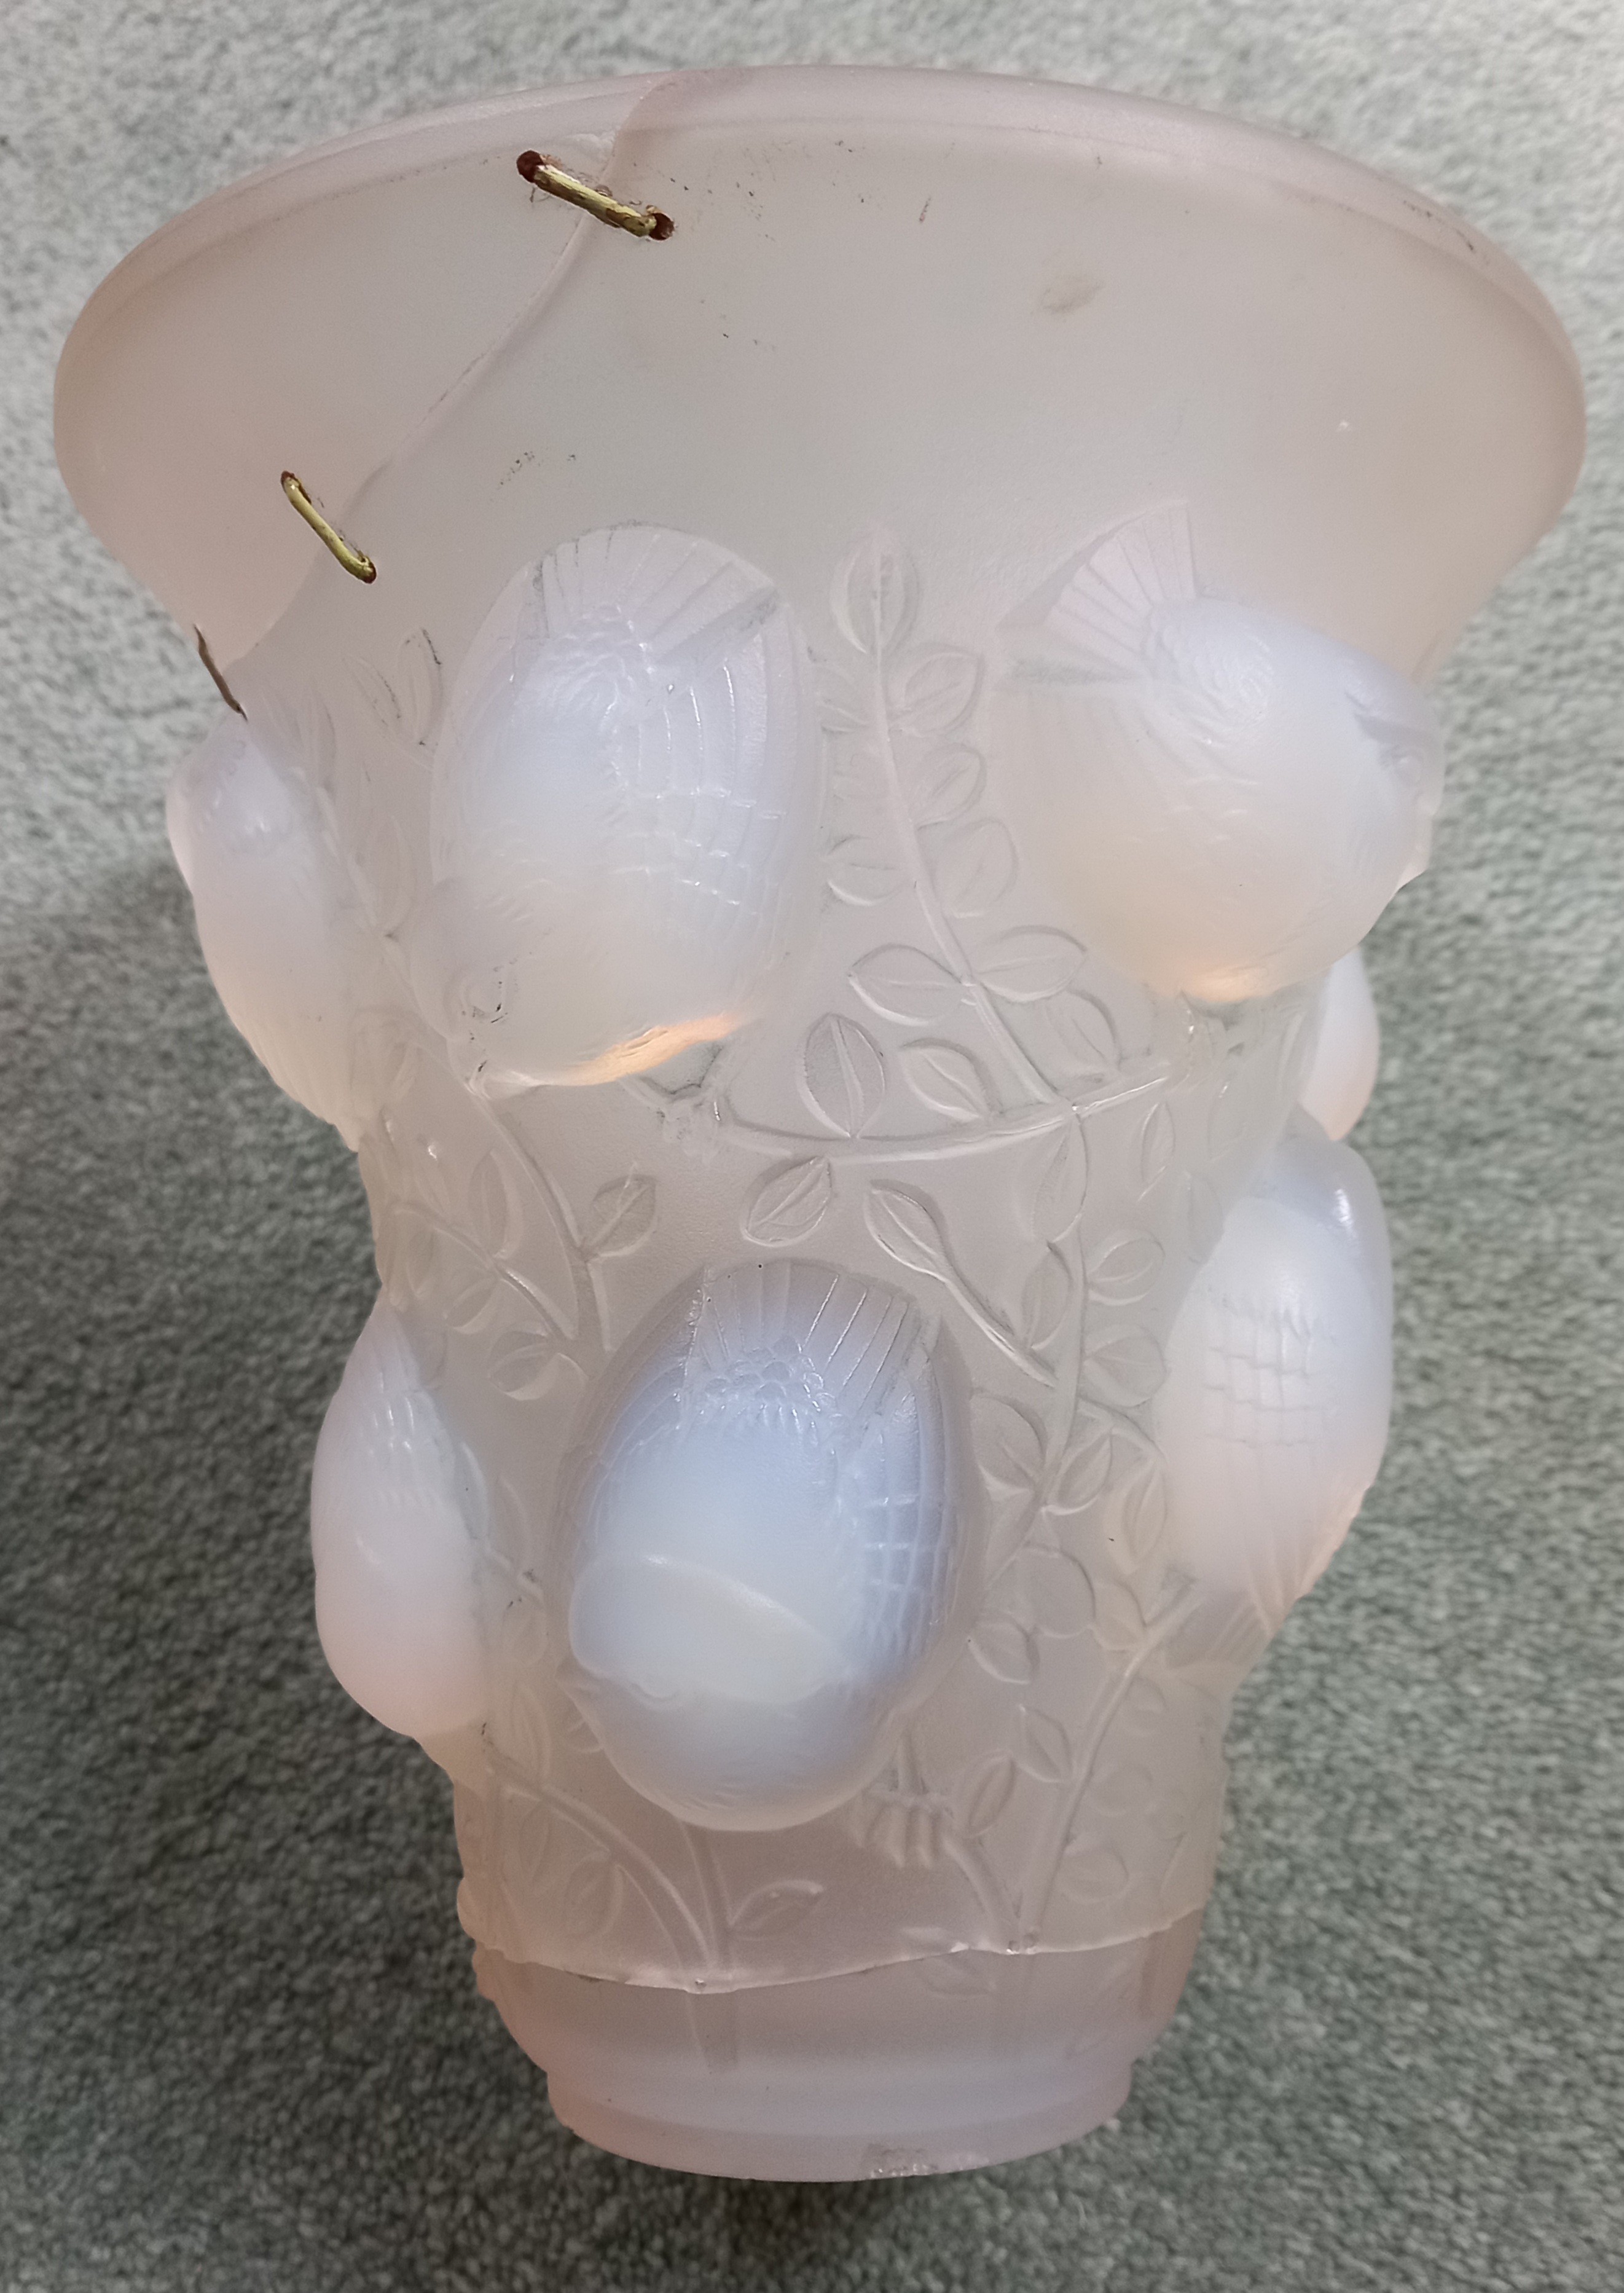 A Rene Lalique (French, 1860-1945) "Saint Francois" opalescent glass vase, the body relief moulded - Image 6 of 6